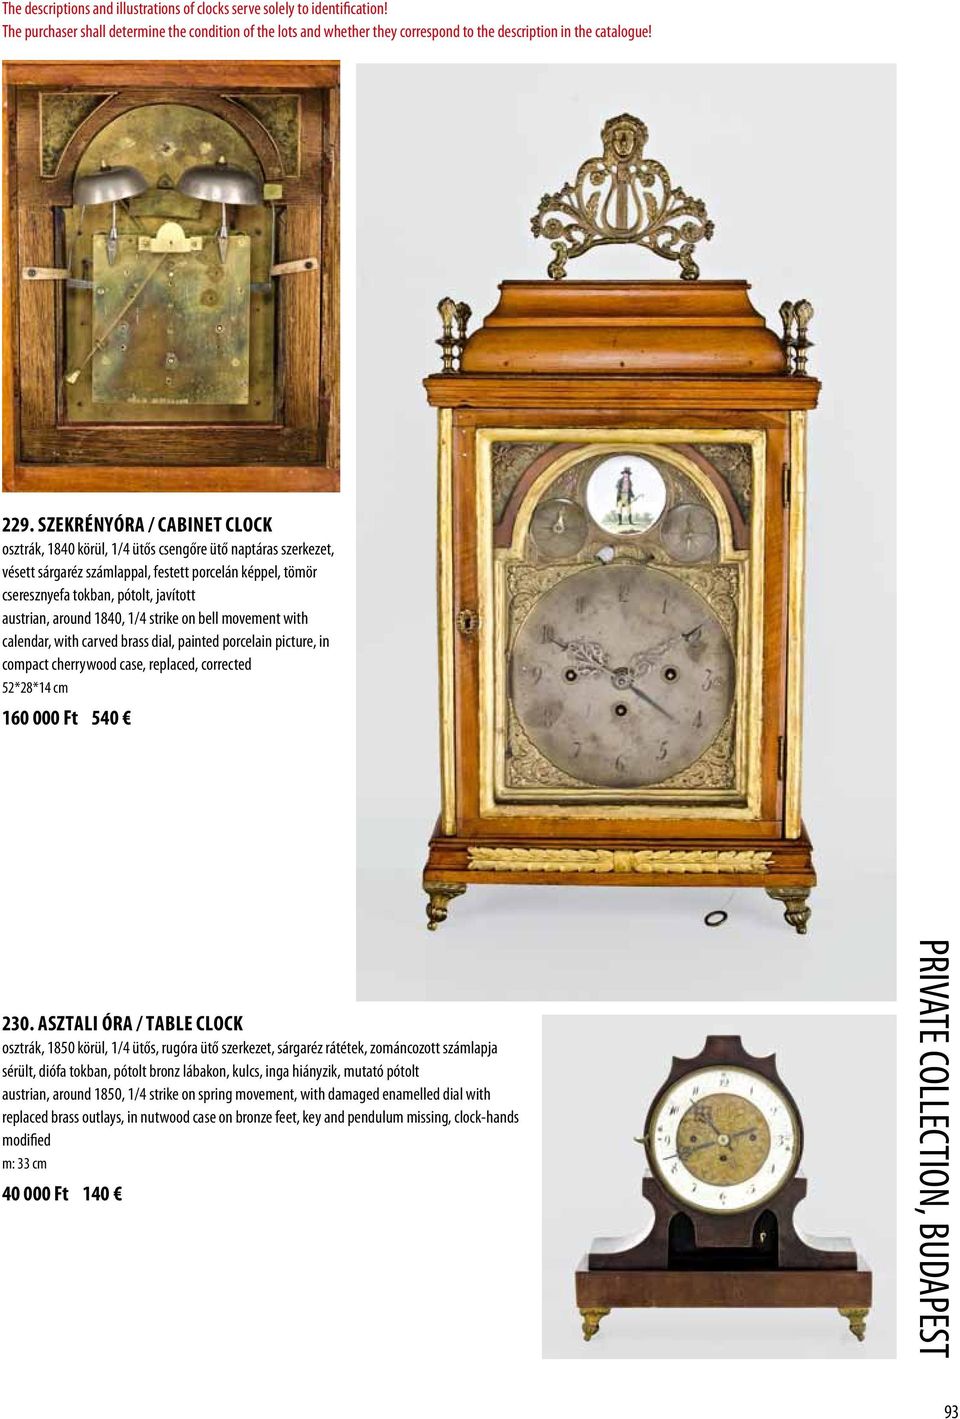 austrian, around 1840, 1/4 strike on bell movement with calendar, with carved brass dial, painted porcelain picture, in compact cherrywood case, replaced, corrected 52*28*14 cm 160 000 Ft 540 230.